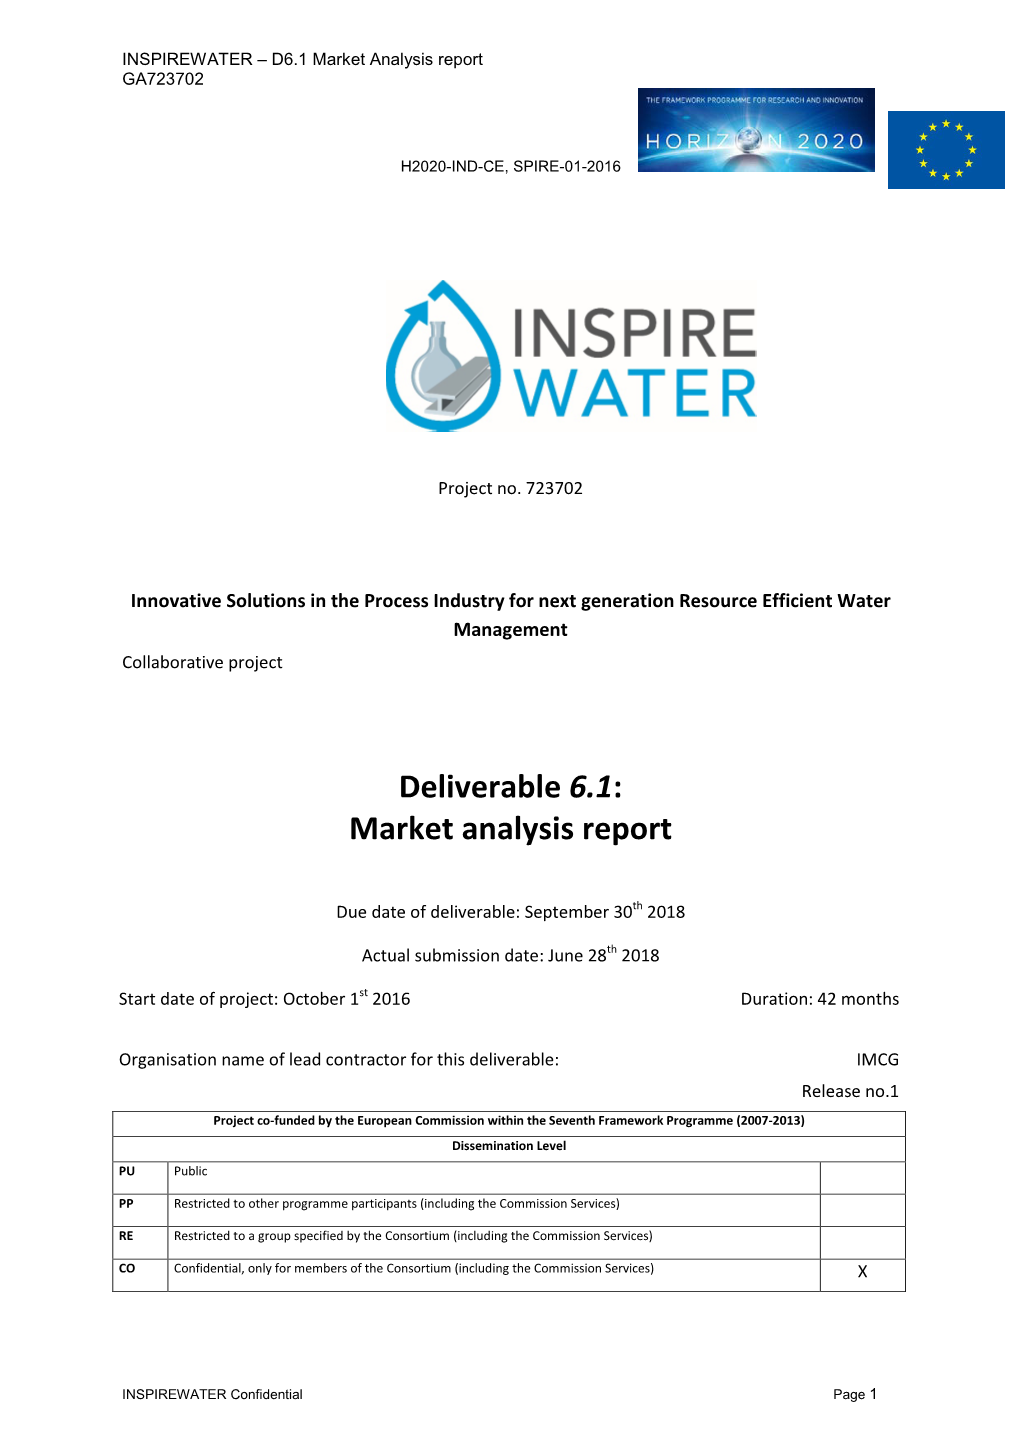 Deliverable 6.1: Market Analysis Report